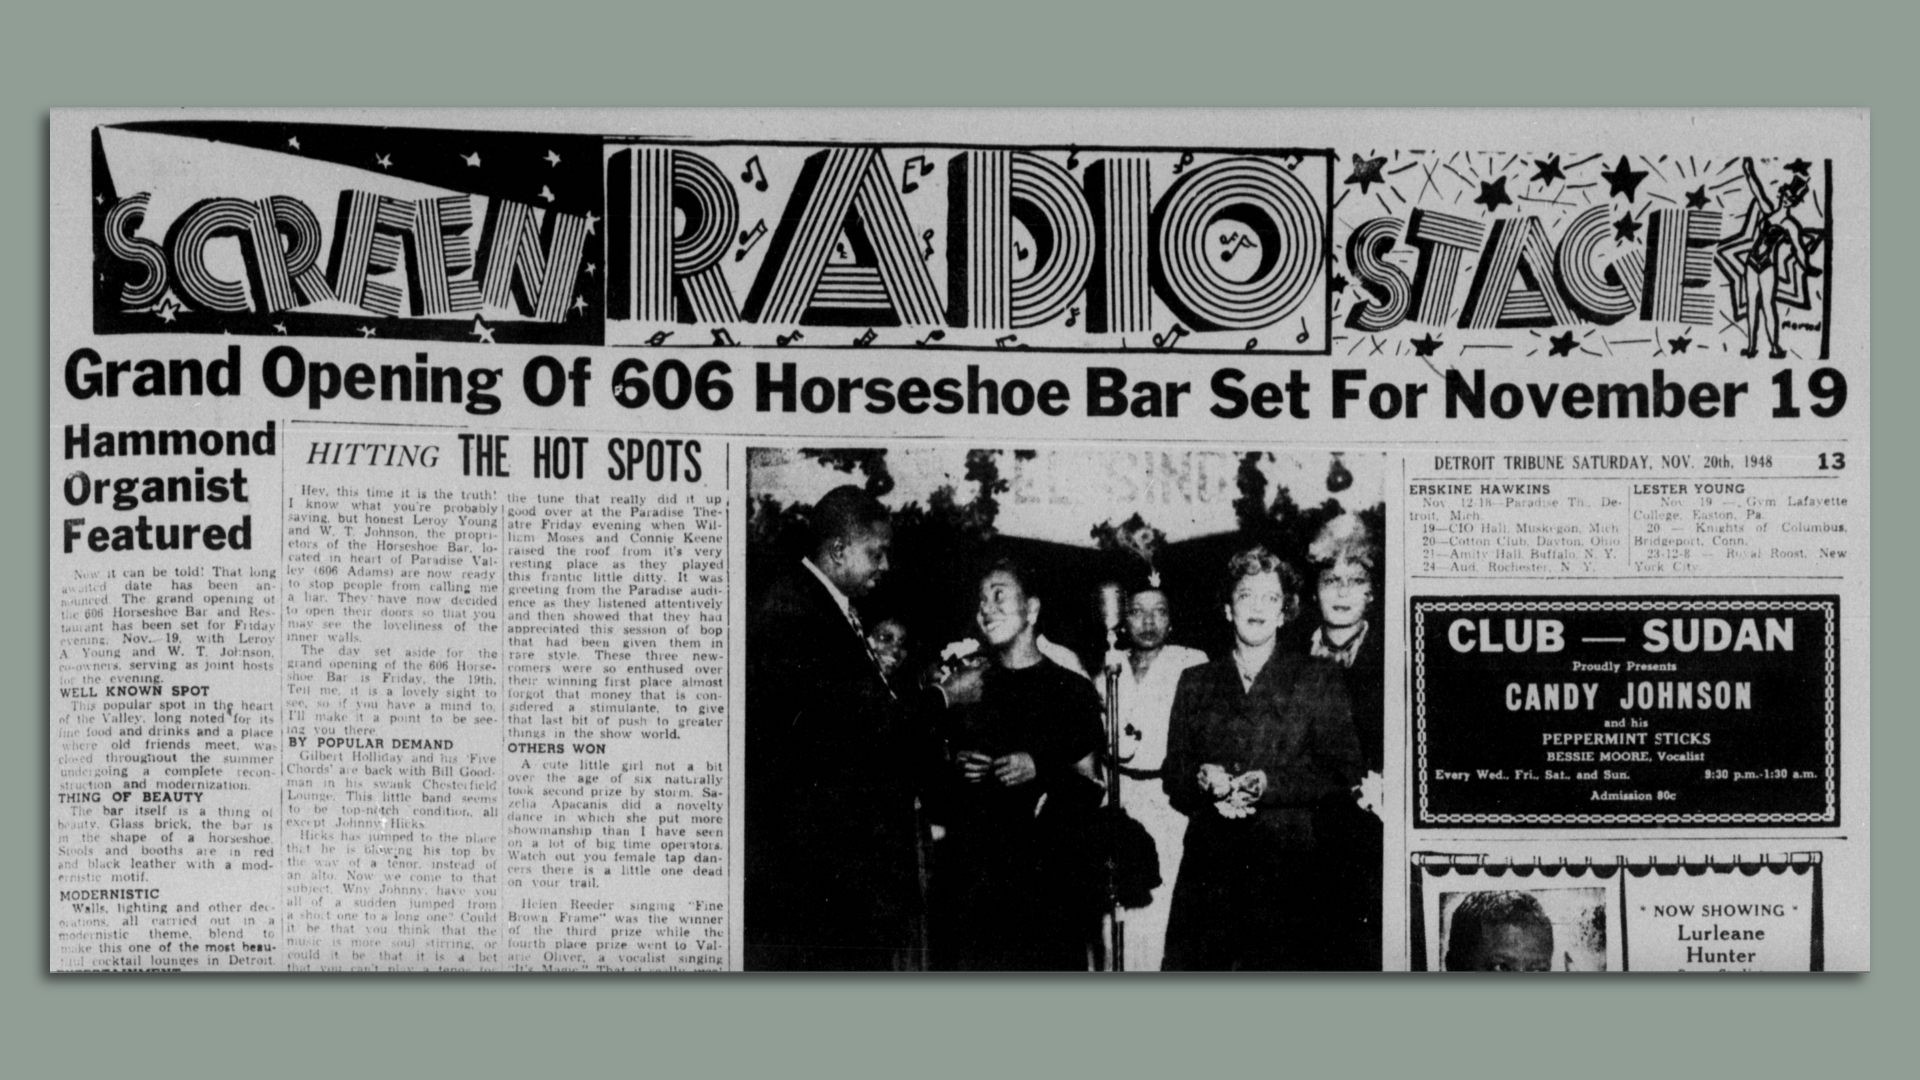 The Detroit Tribune reported the opening of 606 Horseshoe Bar in 1948. 